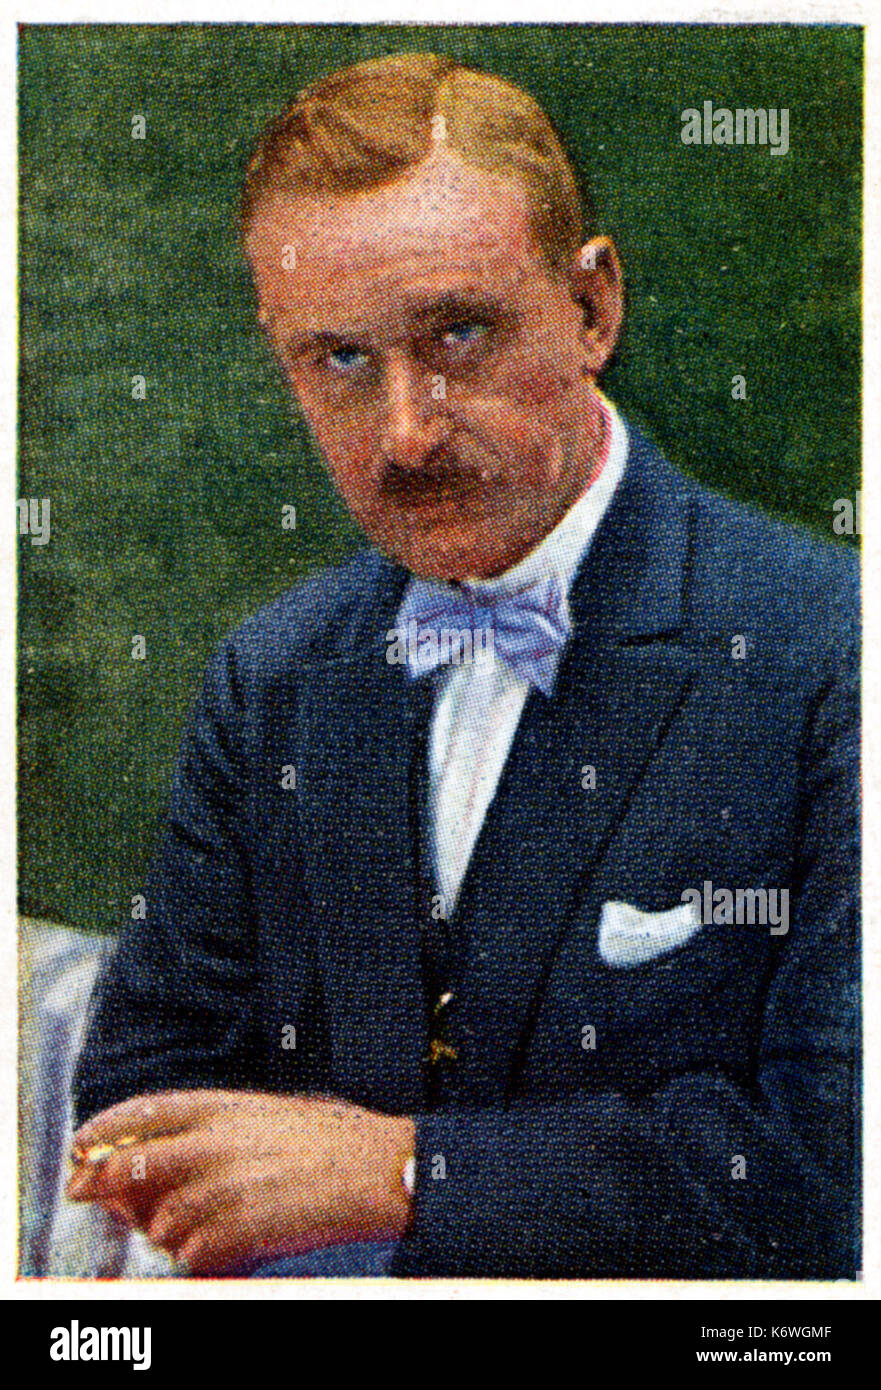 Thomas Mann - German writer, 1875-1955. His novel 'Death in Venice' is at the source of the inspiration of Mahler's 5th Symphony. Also the source of Britten's opera 'Death in Venice'. Stock Photo